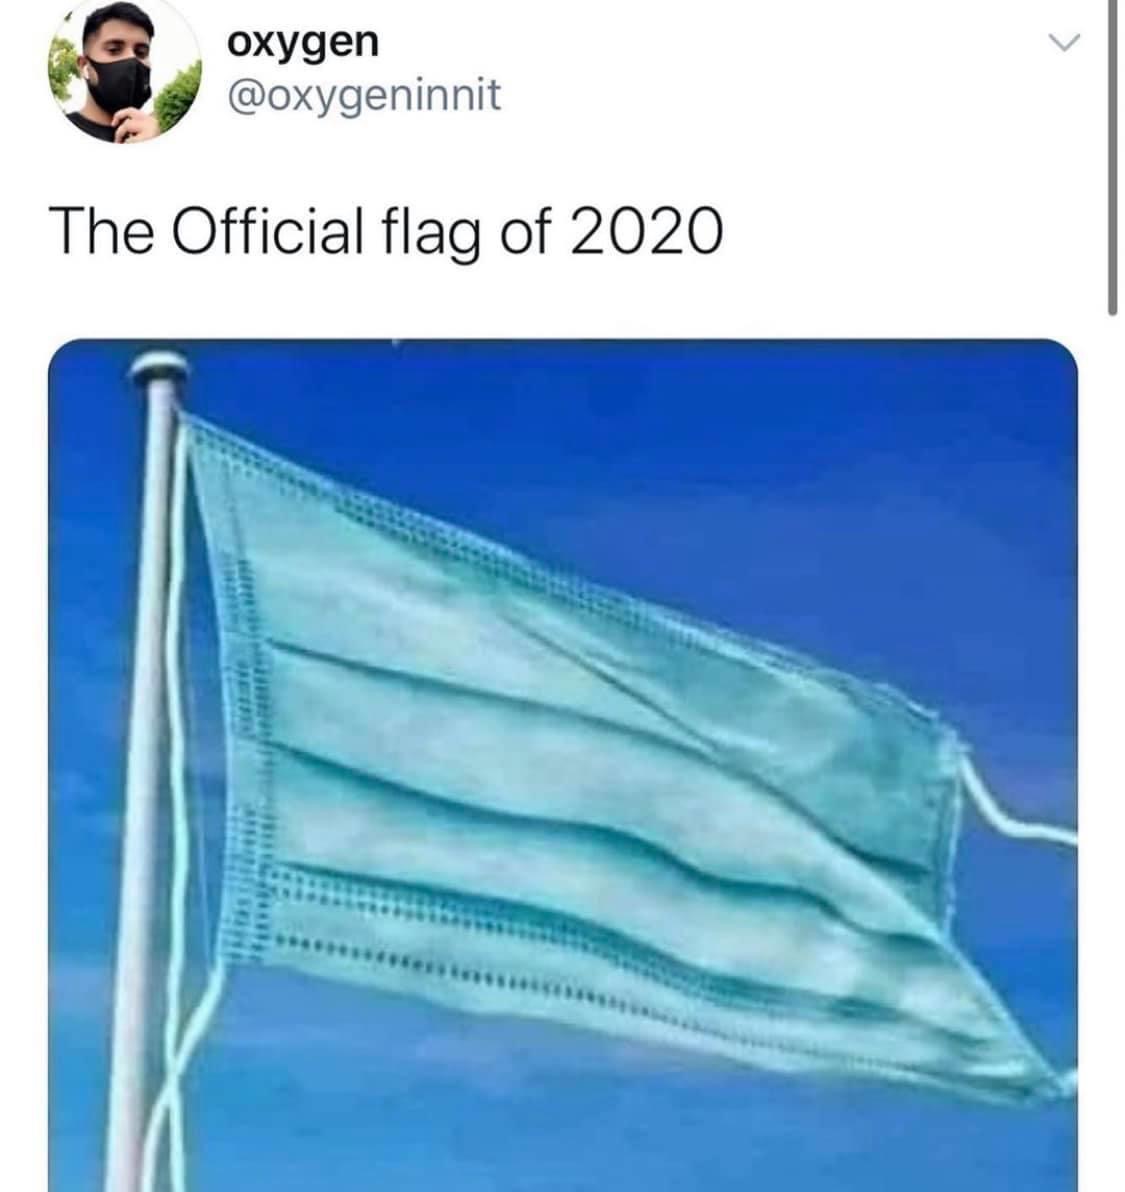 flag mask one world - oxygen The Official flag of 2020